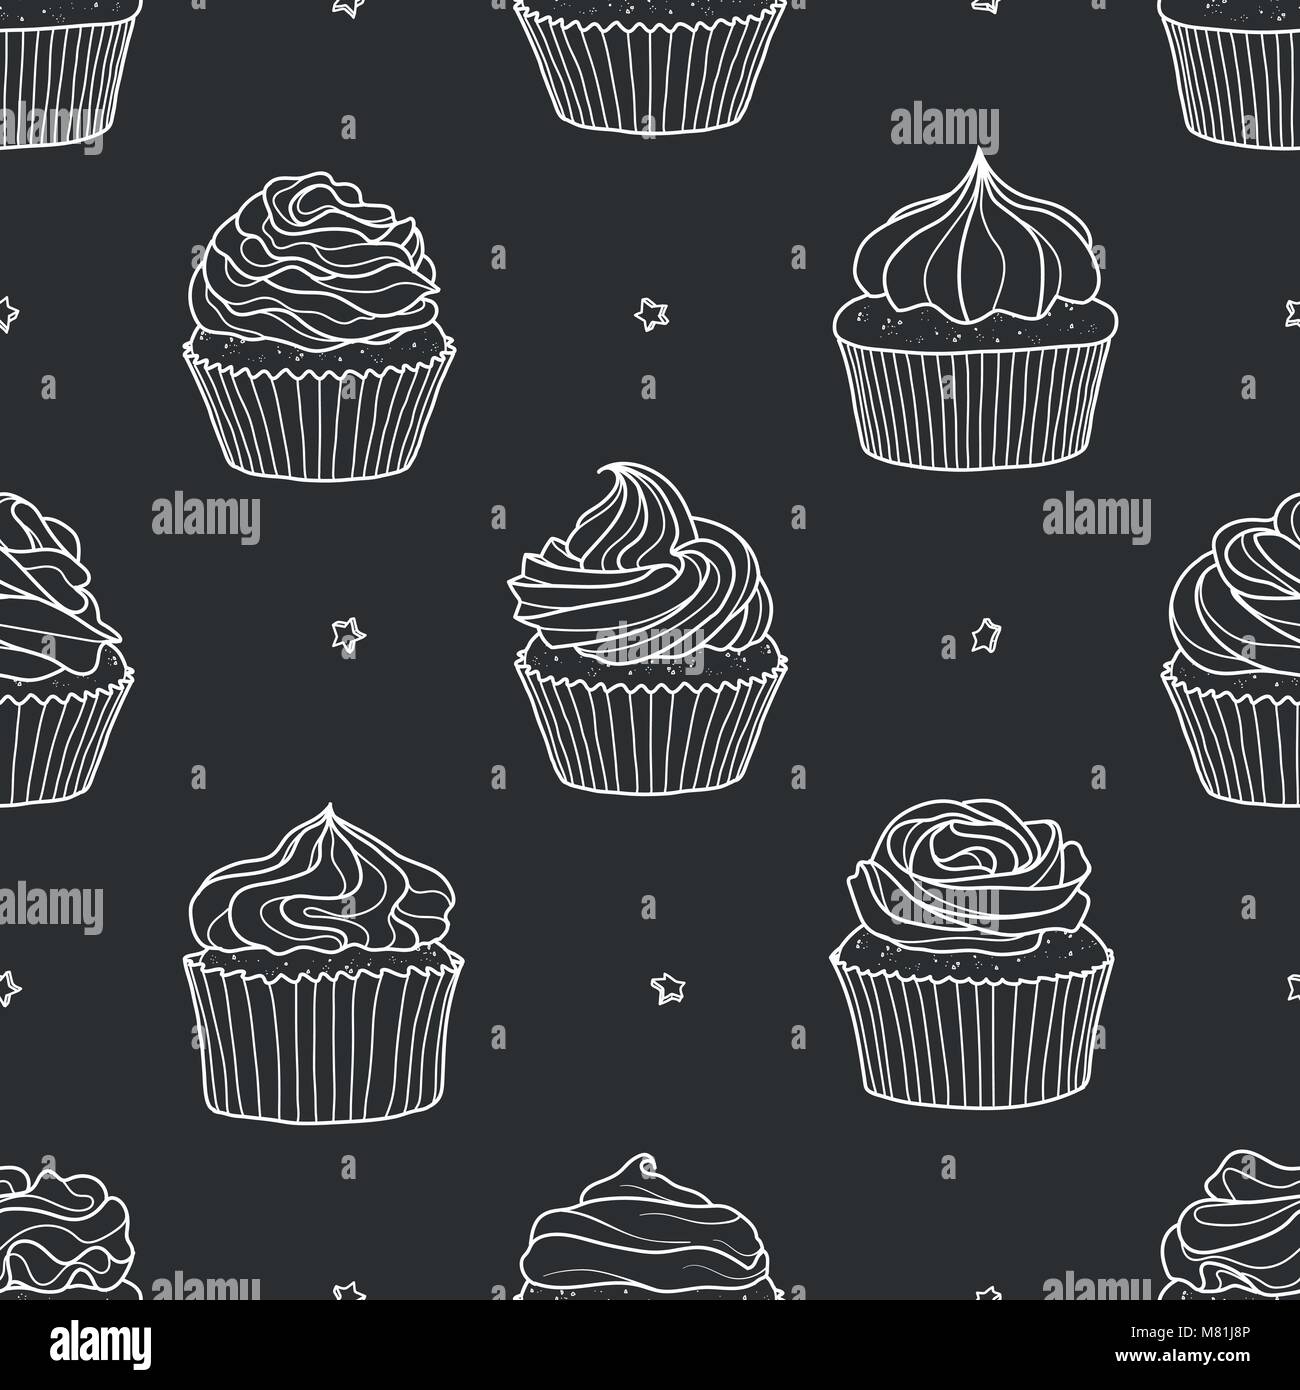 8 styles of cupcakes and star random on gray background. Cute hand drawn seamless pattern of dessert in white outline style. Stock Vector